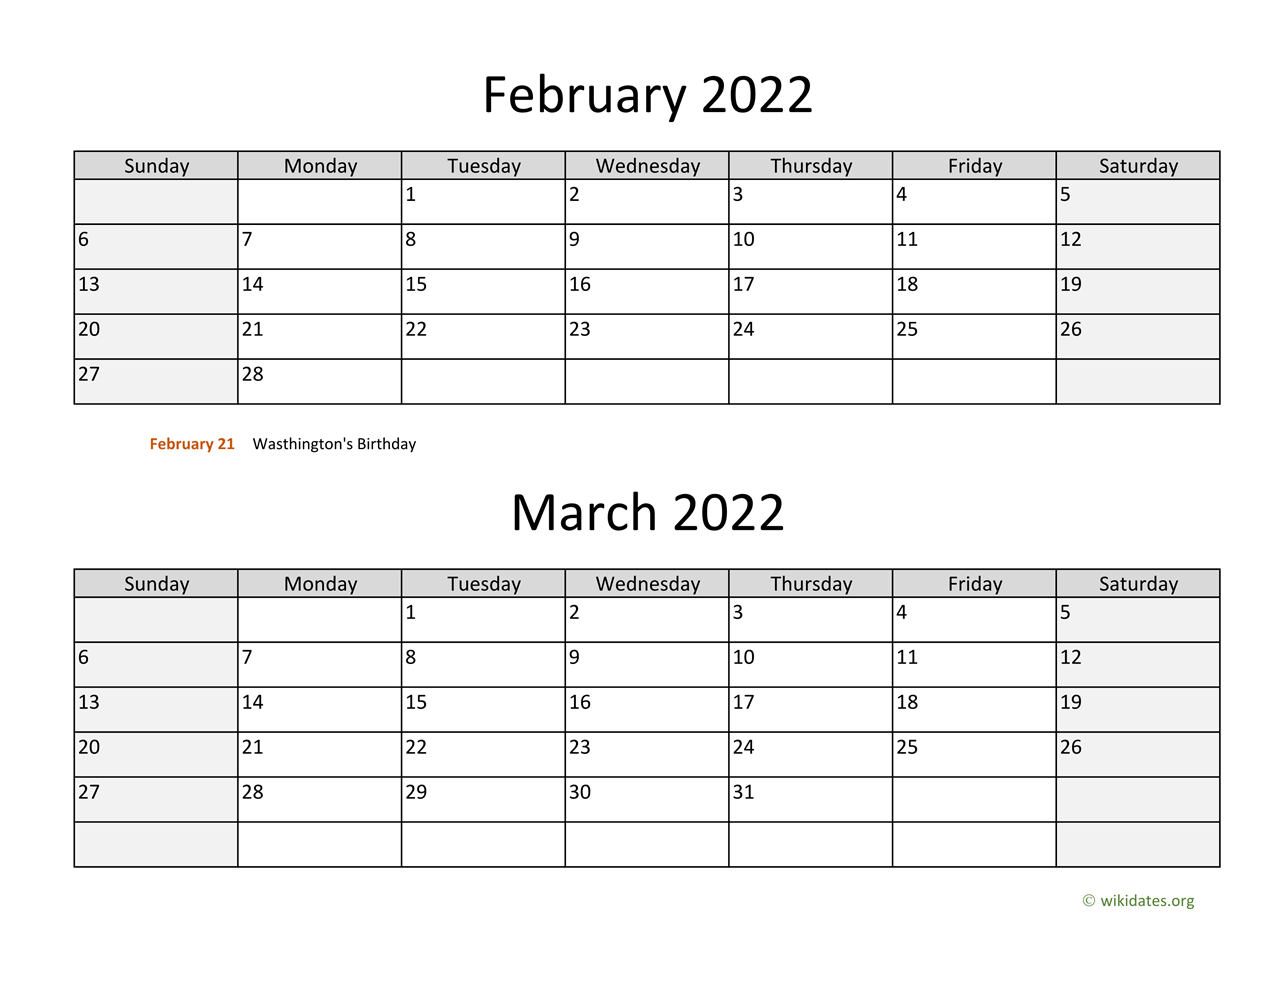 February And March 2022 Calendar February And March 2022 Calendar | Wikidates.org